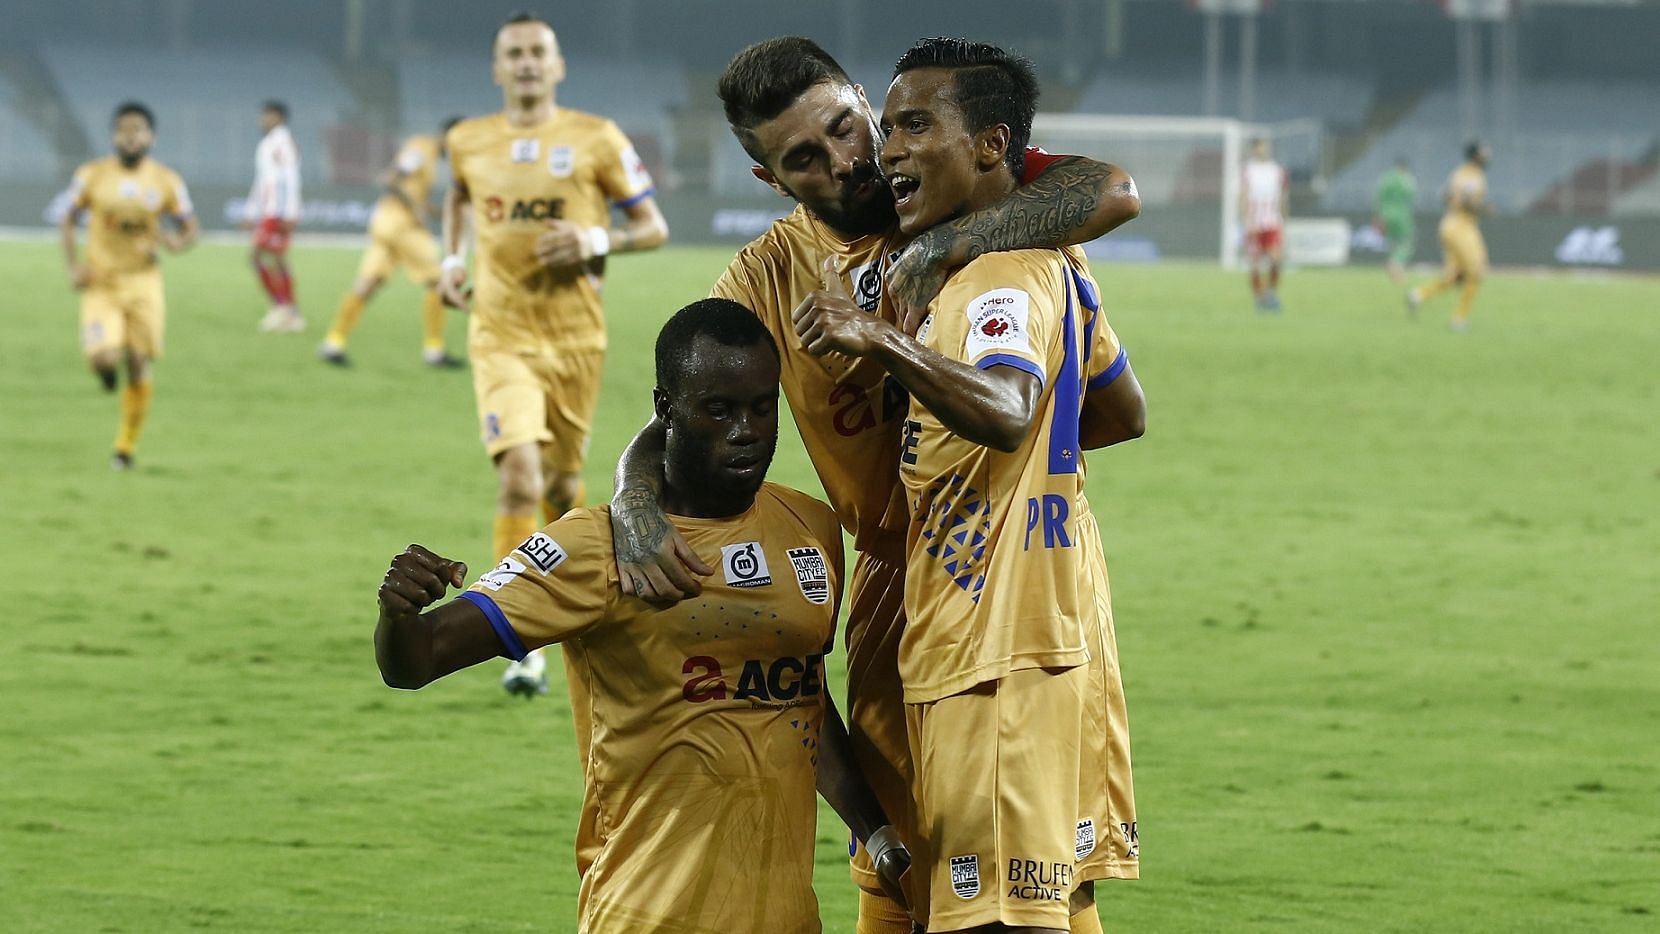 A Moudou Sougou hat-trick was enough for Mumbai City FC to drub ATK 3-1 and confirm a spot in the Indian Super League playoffs.